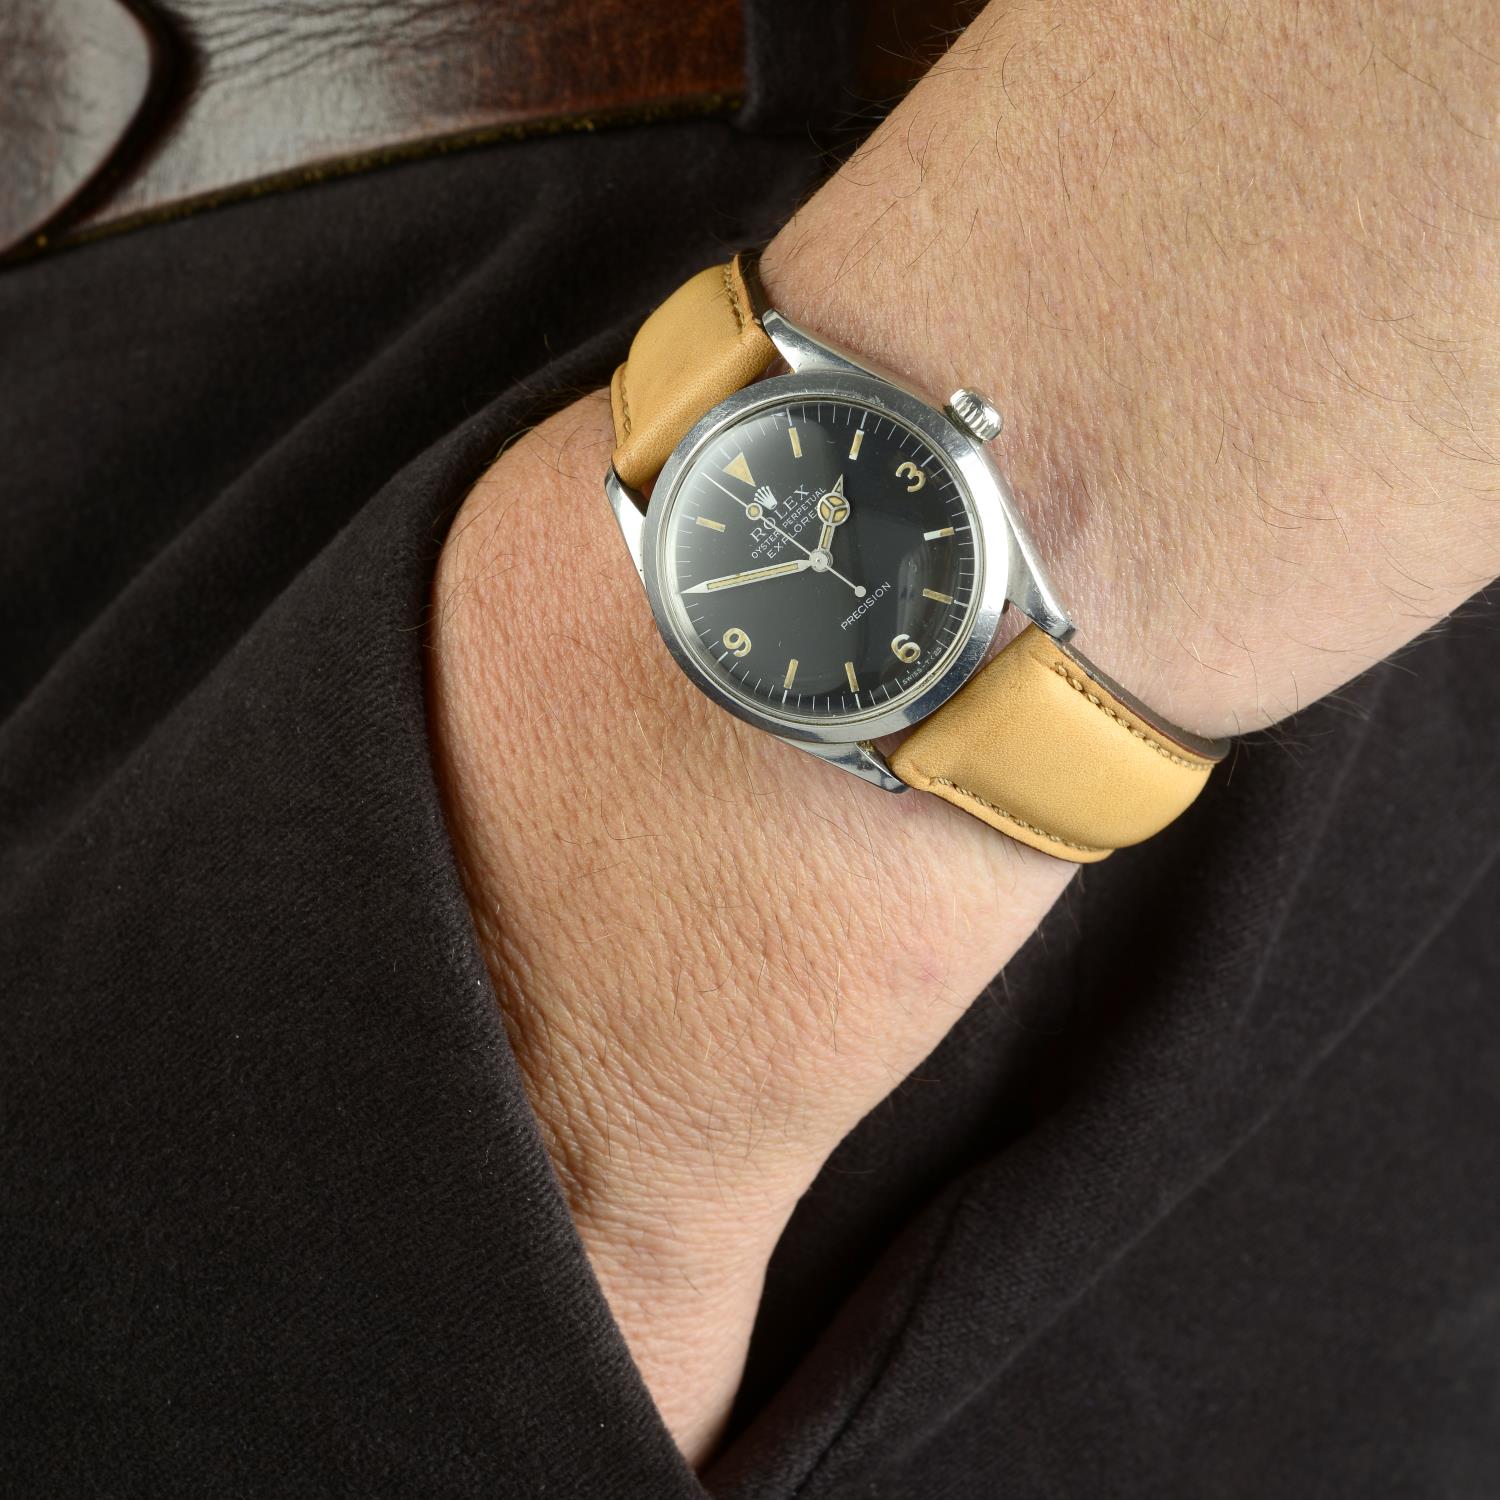 ROLEX - a gentleman's Oyster Perpetual Explorer Precision wrist watch. - Image 3 of 4